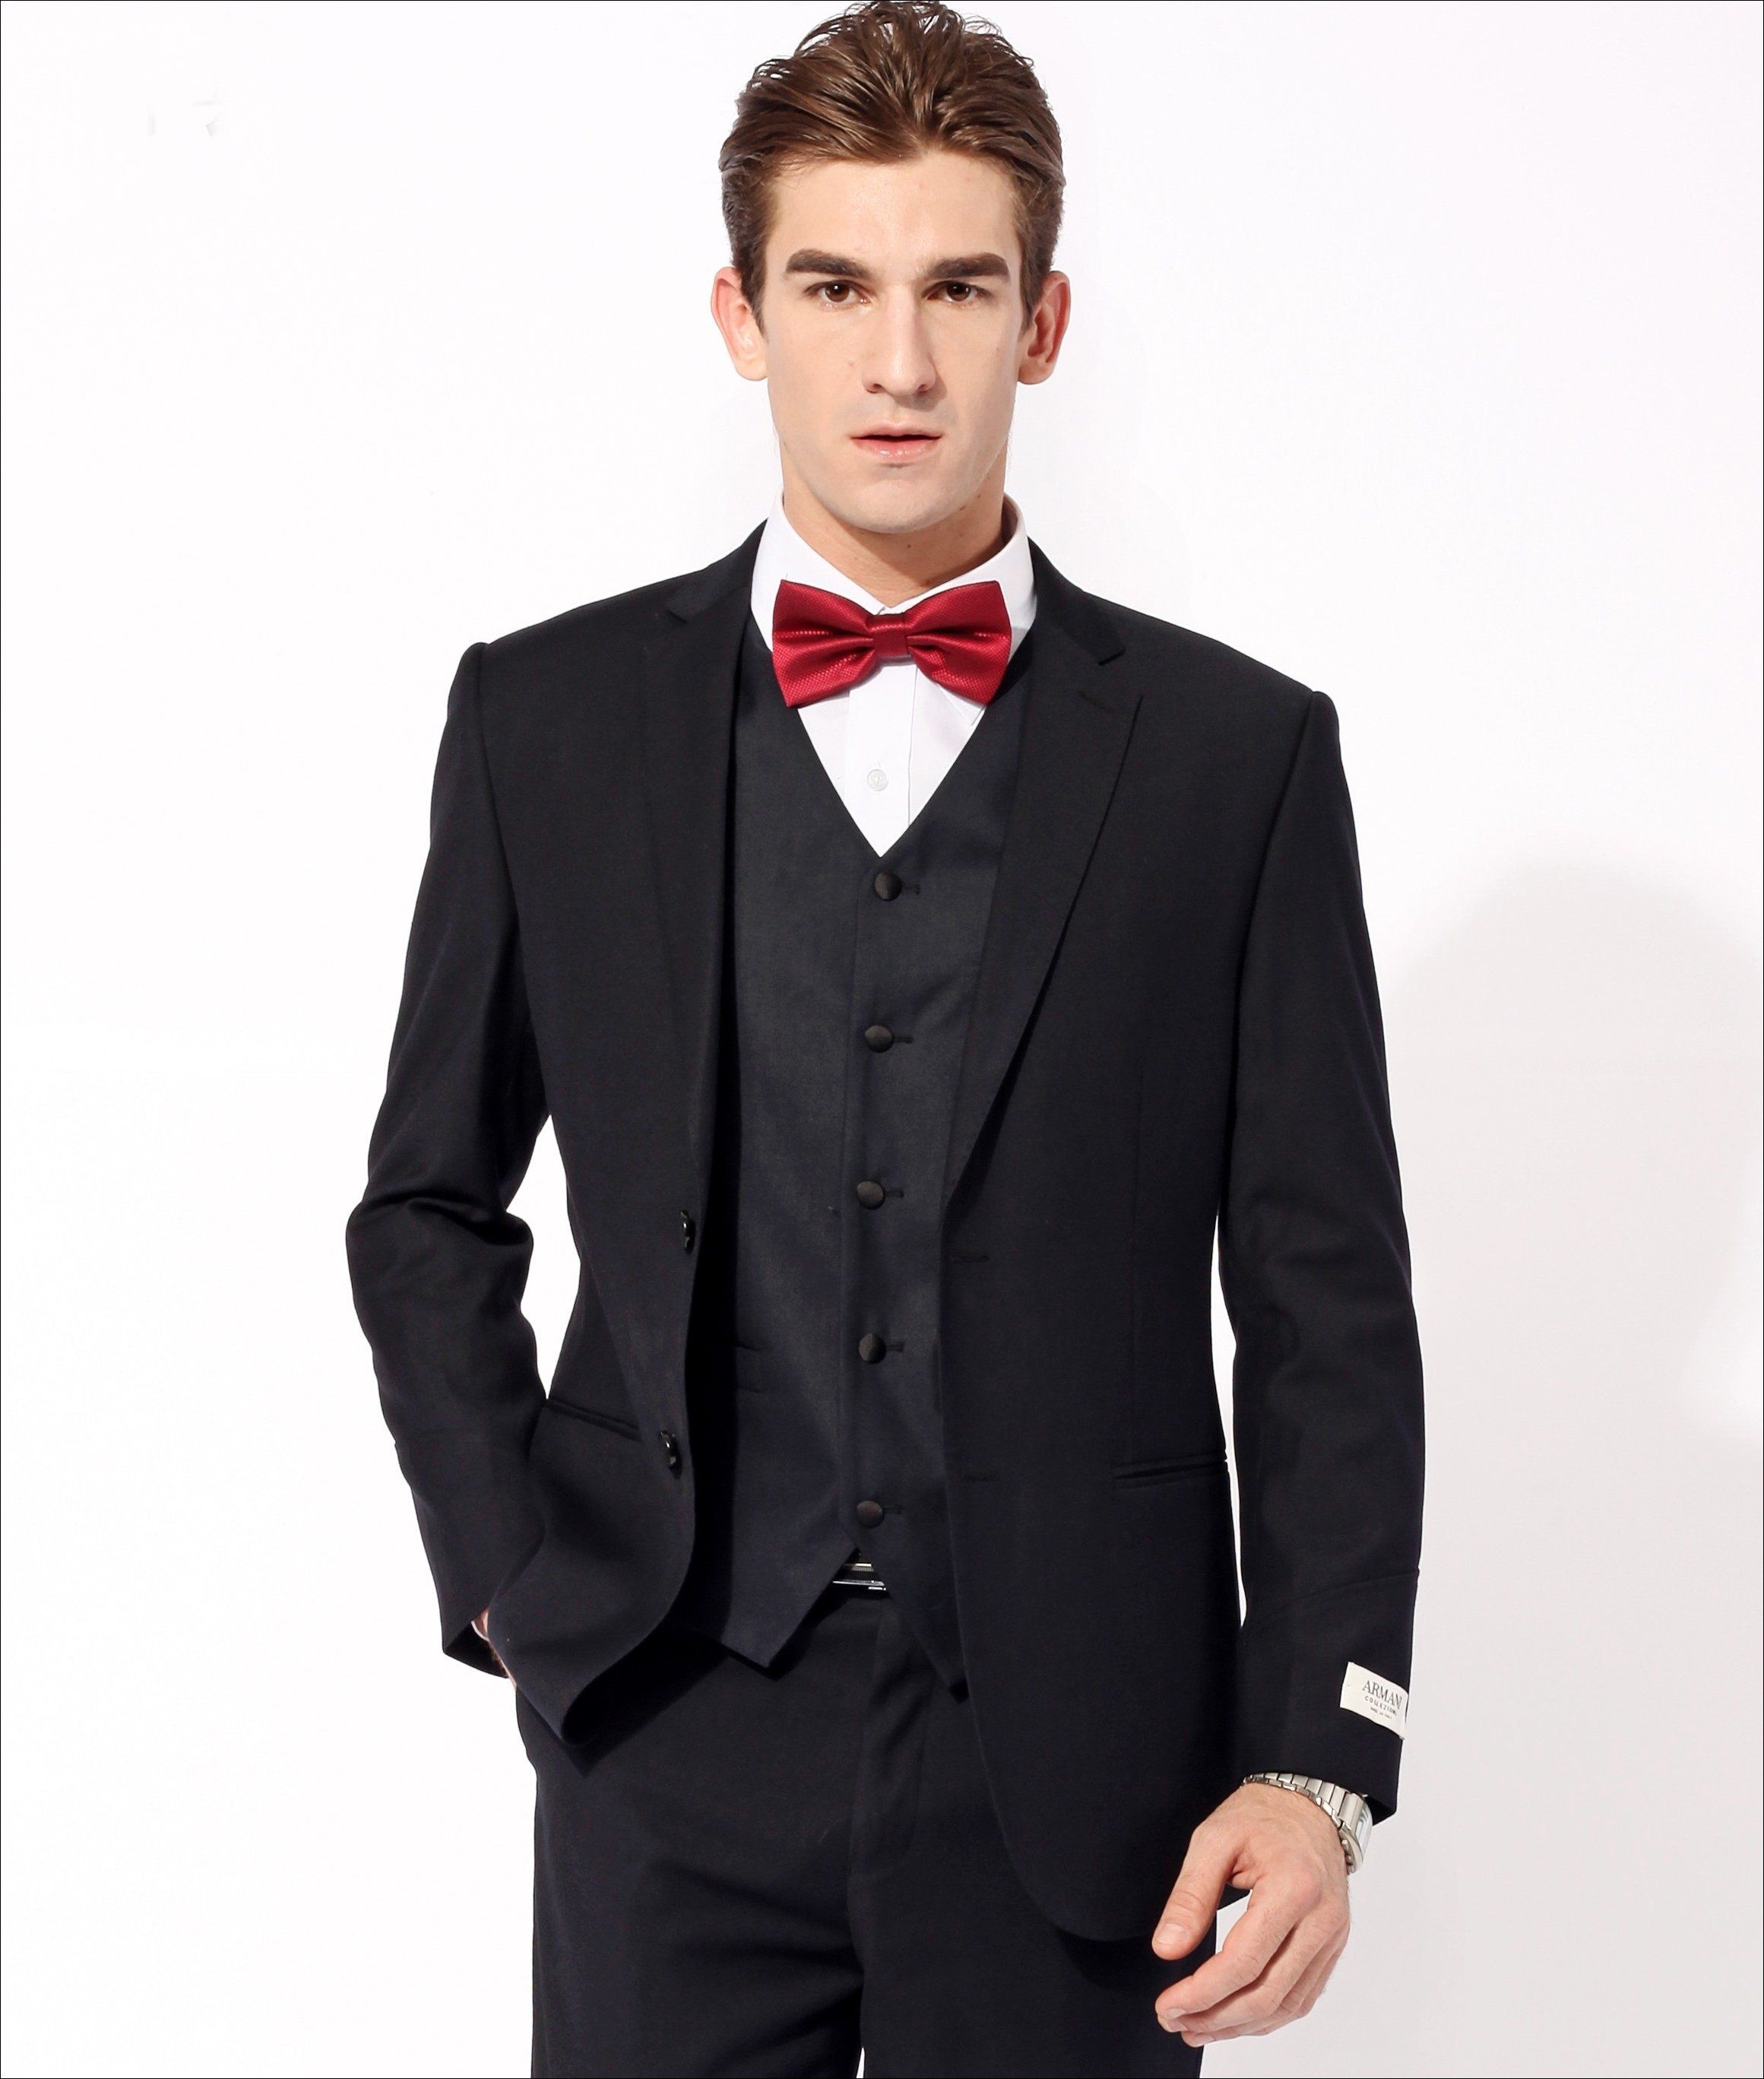 man in black suit with red bow tie - Yahoo Image Search Results | My ...